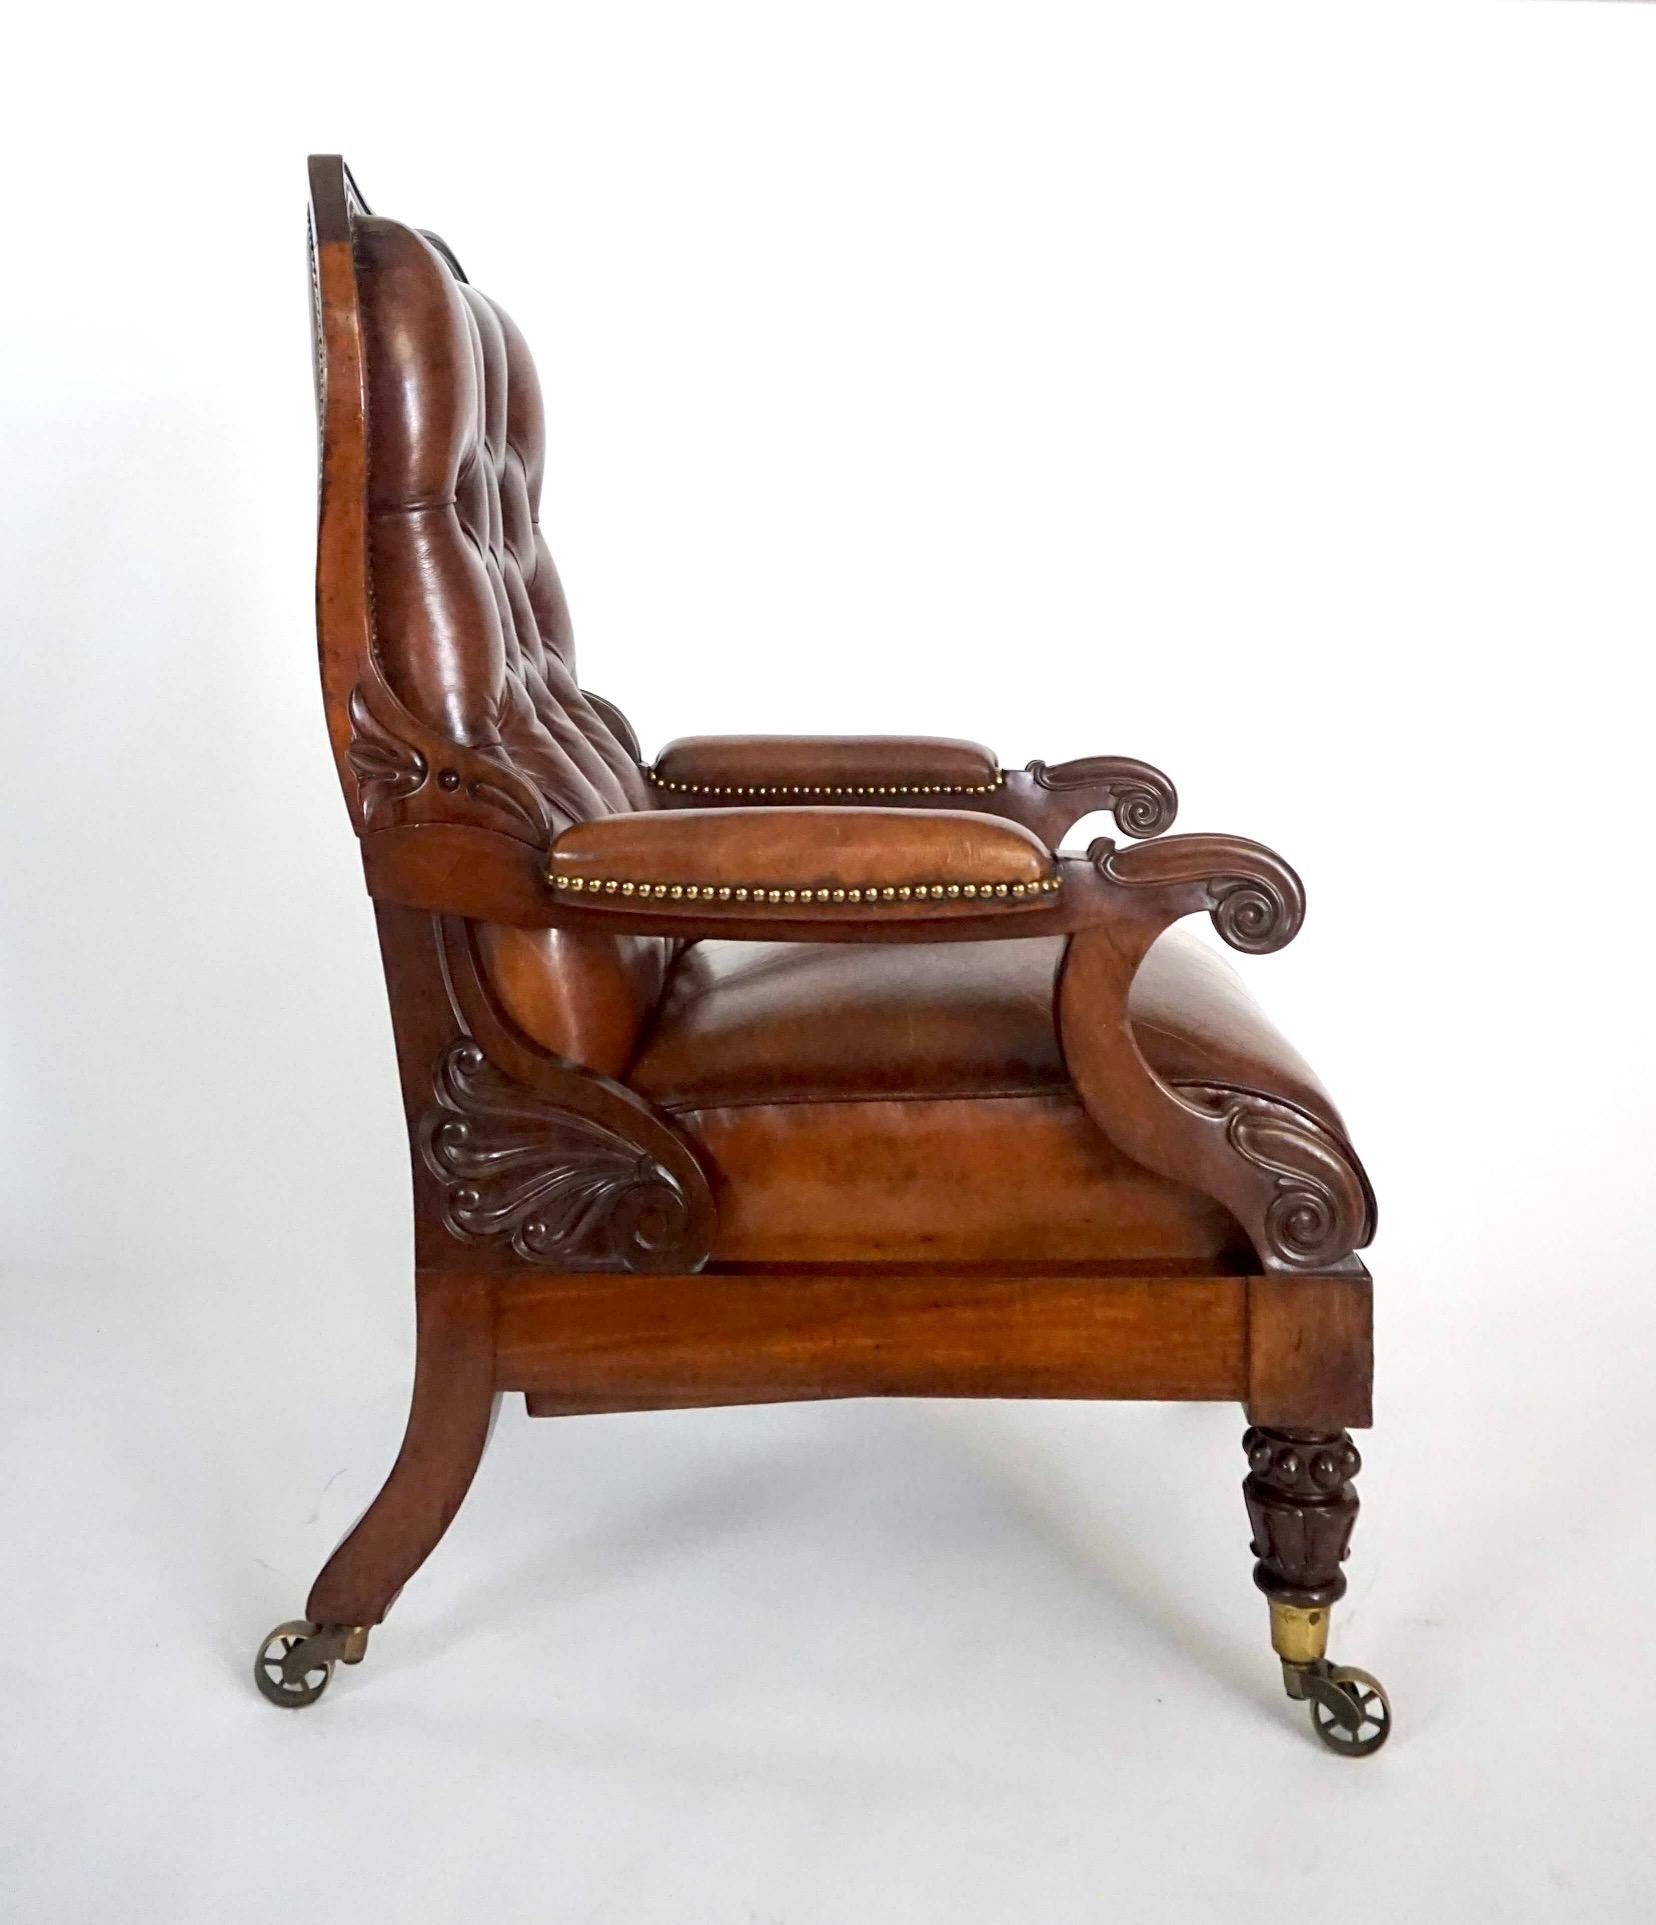 Hand-Carved Regency Leather Upholstered Mahogany Reclining Armchair, circa 1830 For Sale